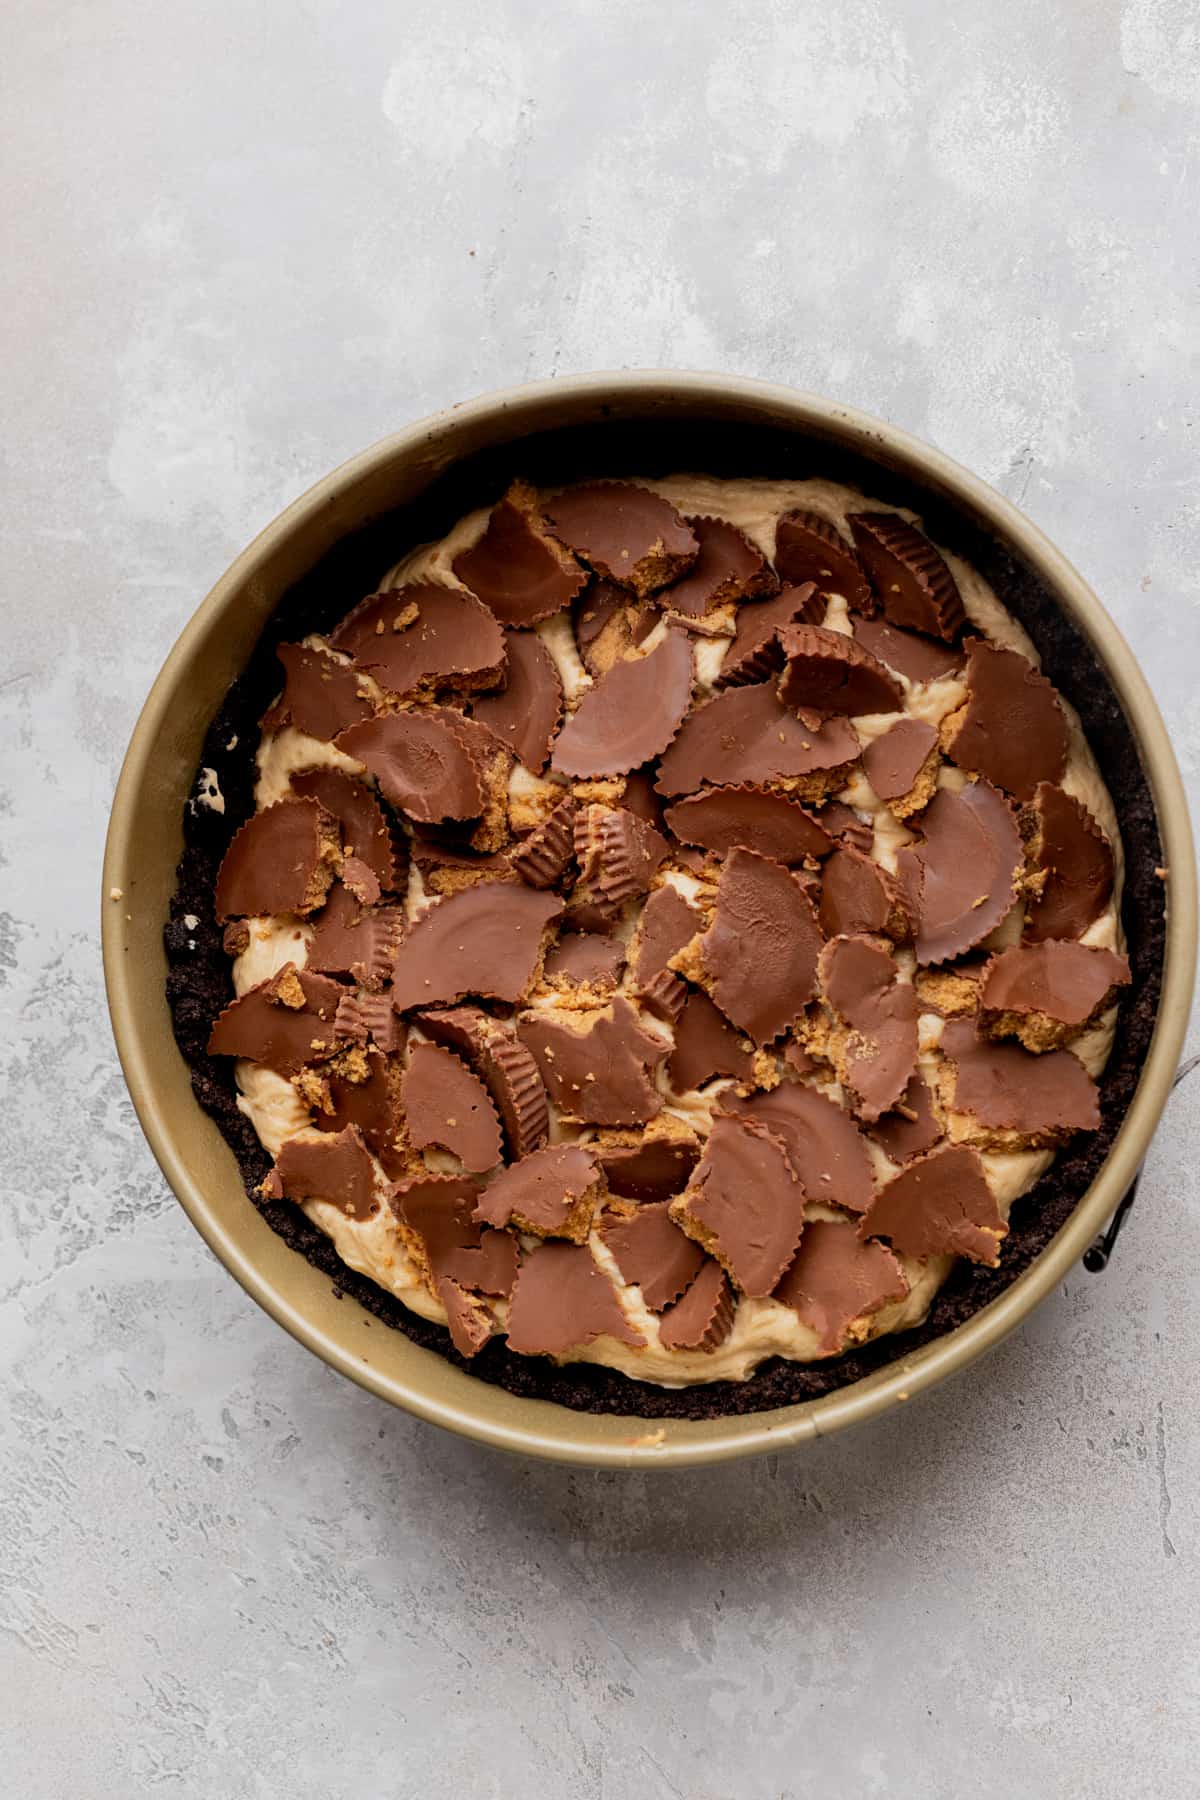 Peanut butter cups crumbled in the pie in a pan.